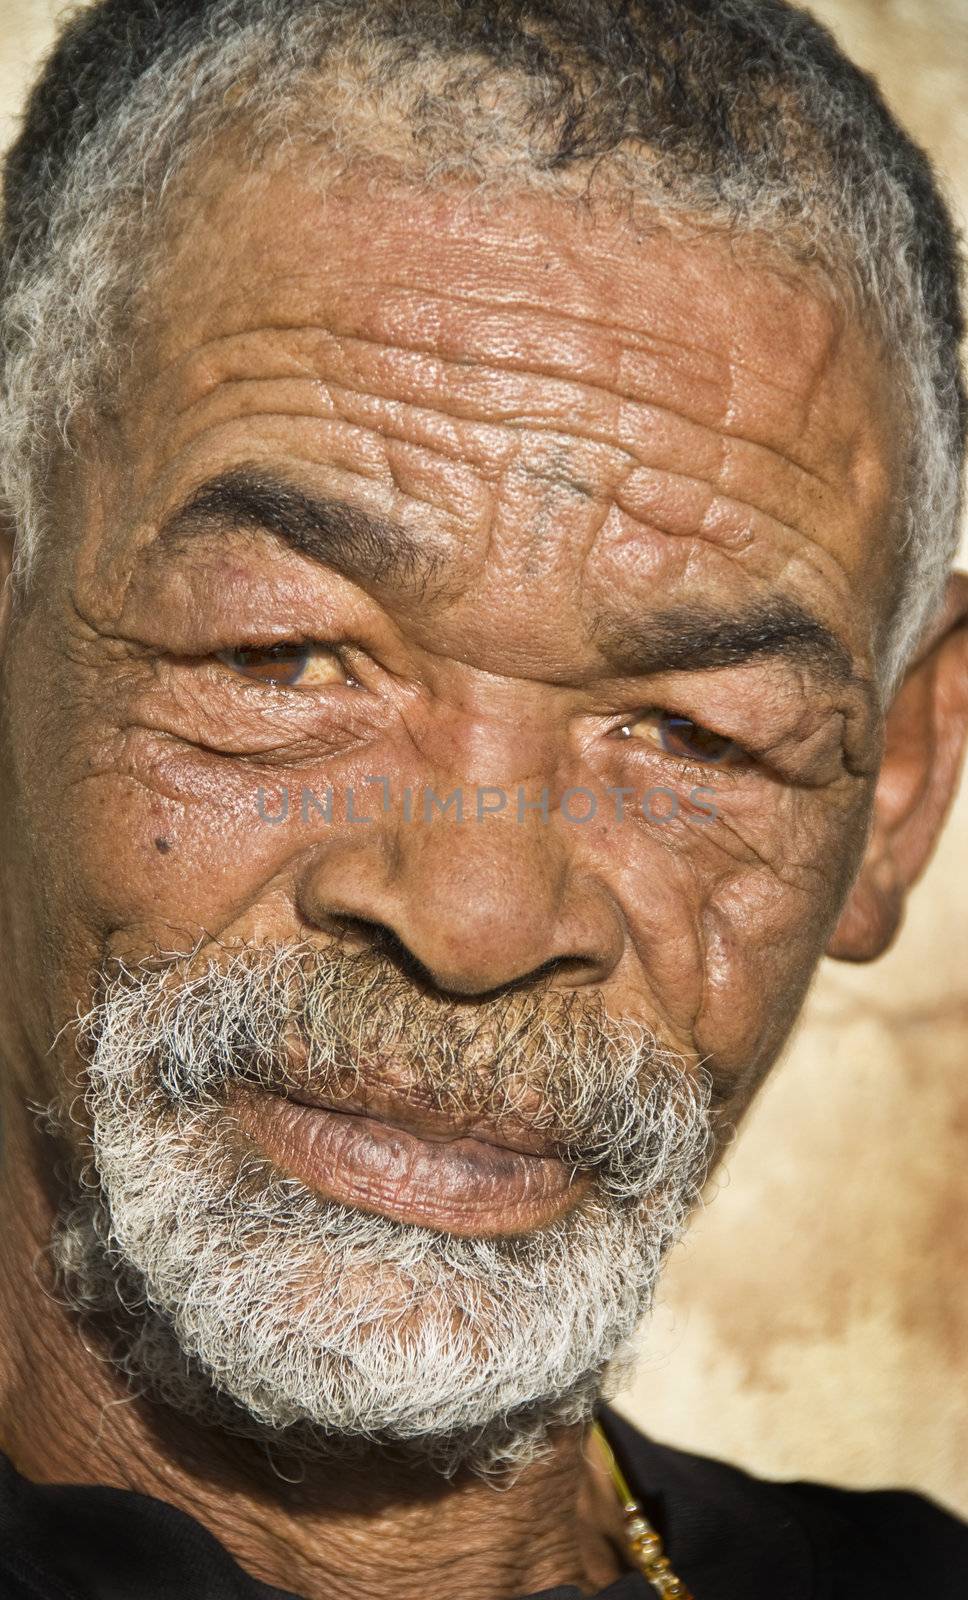 Old African black man with characterful face by tish1